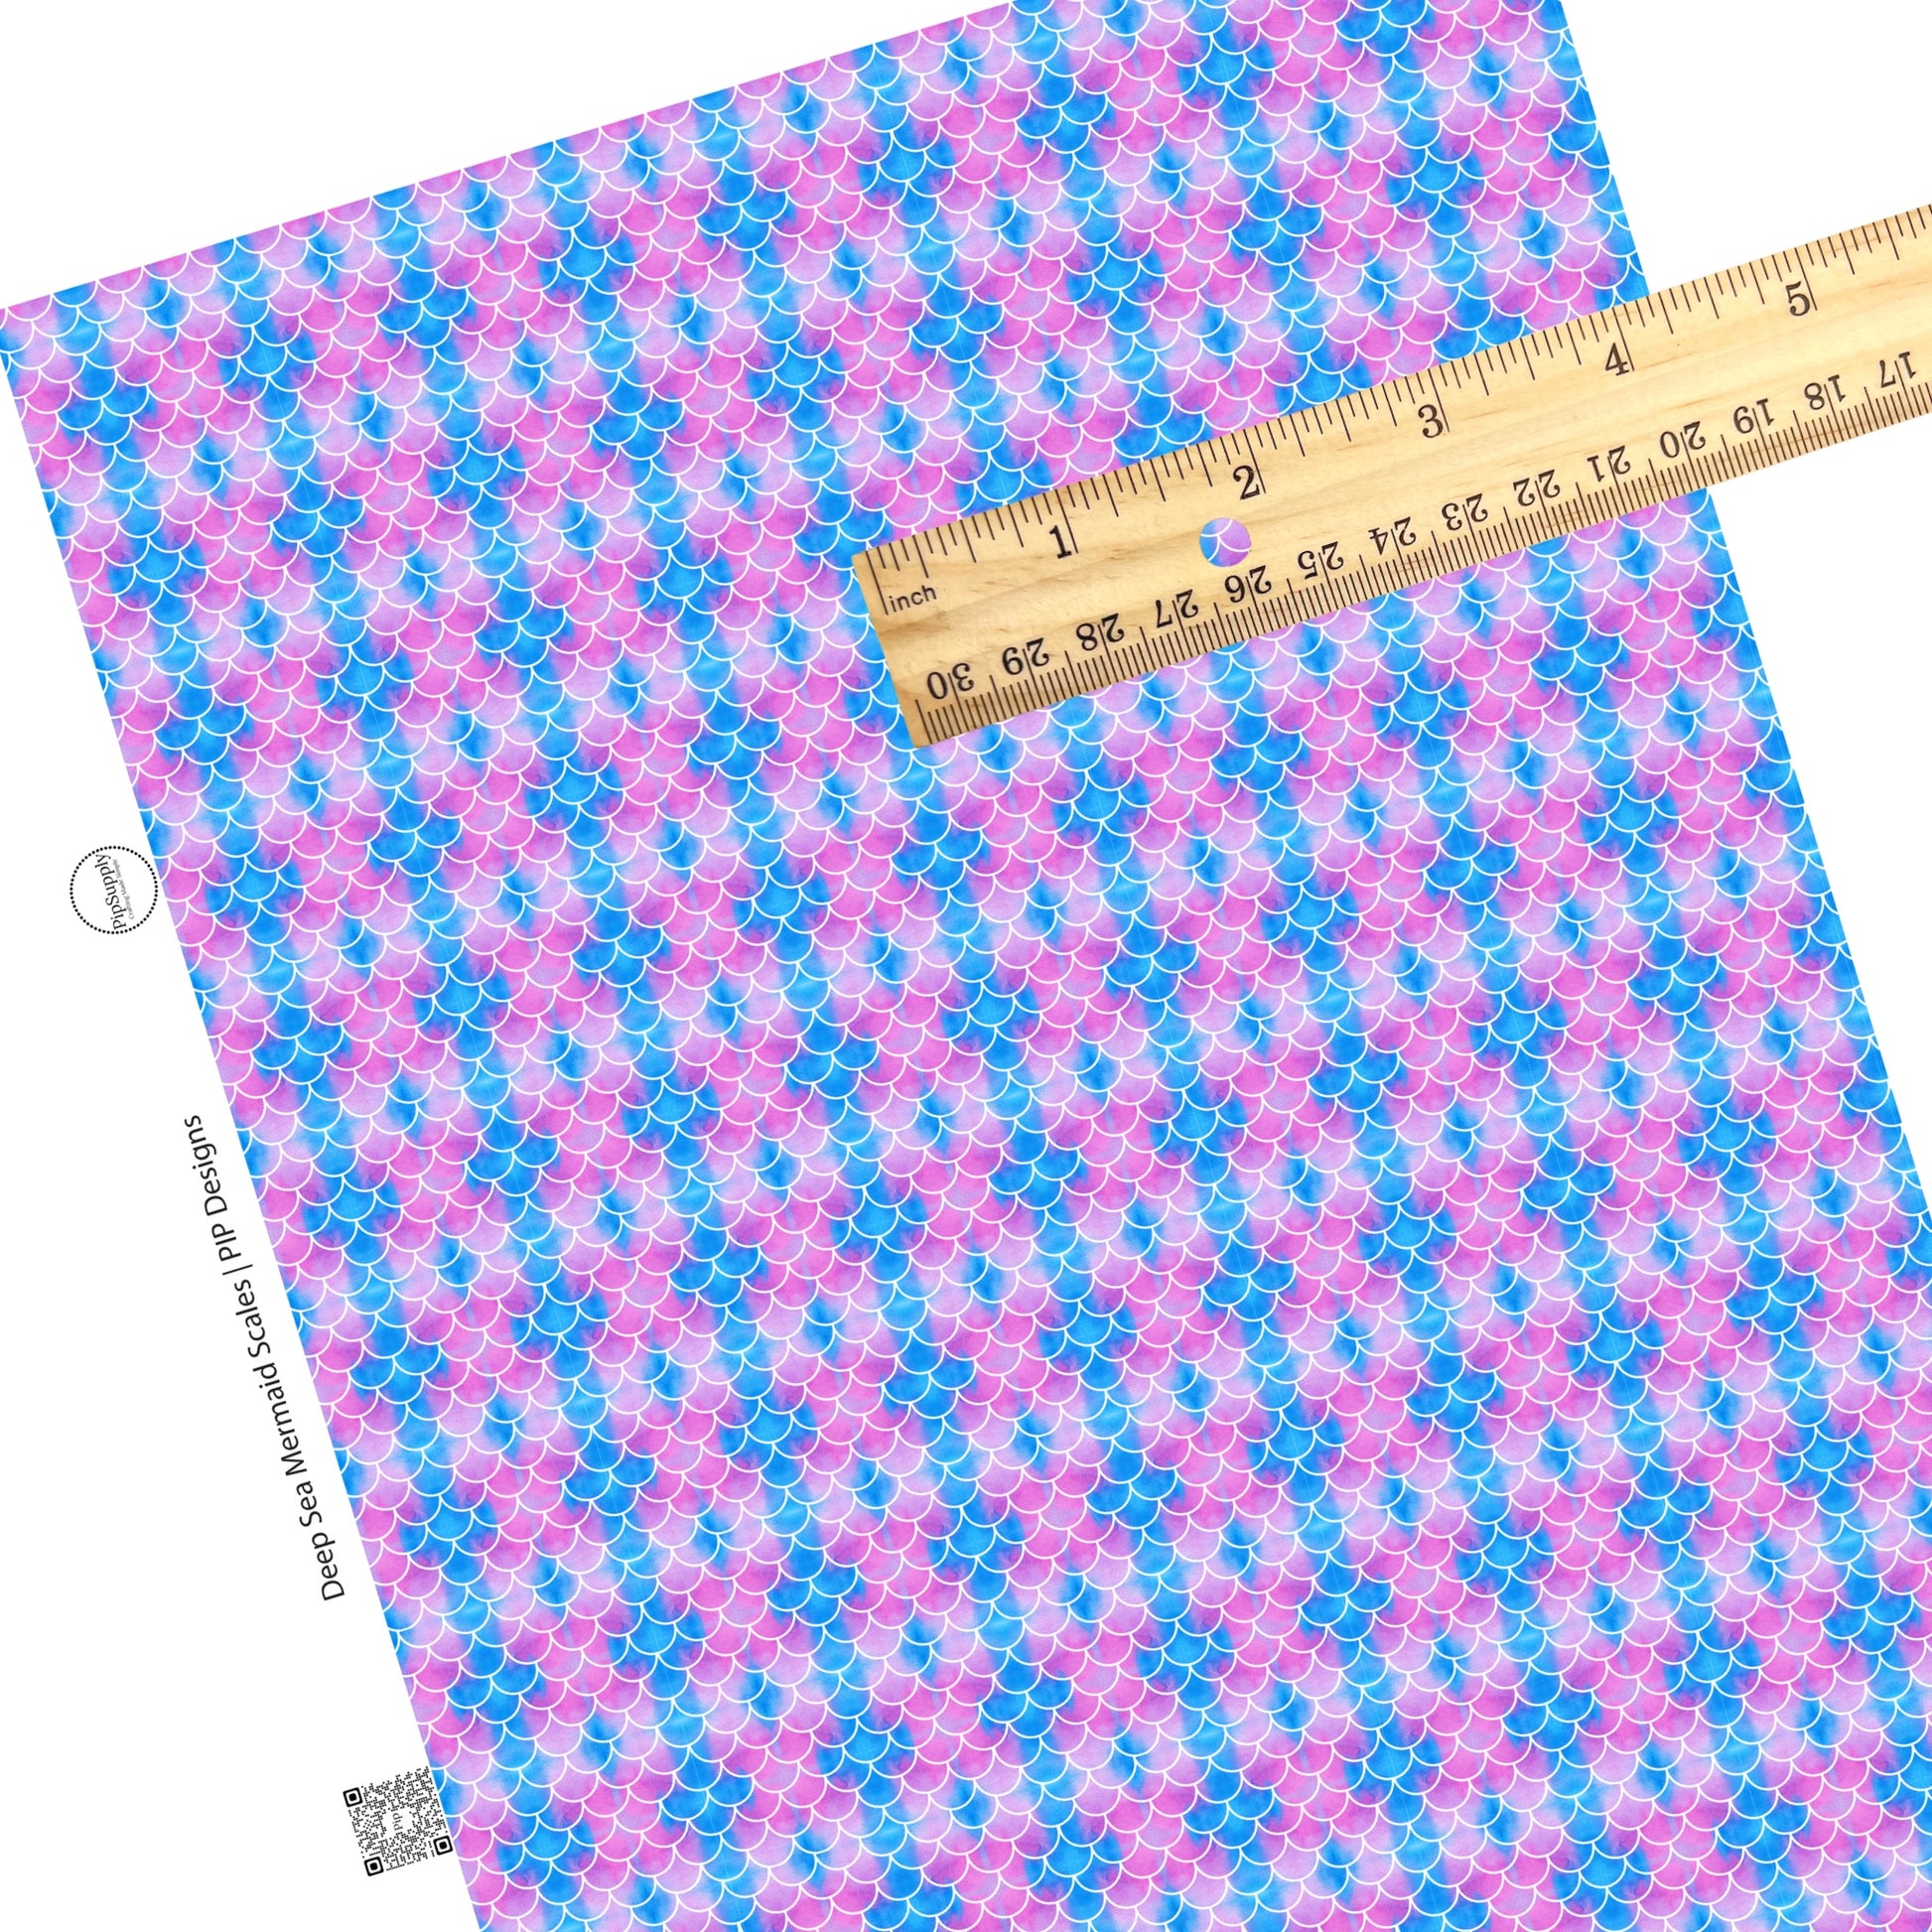 Pink and blue color combination of mermaid scale faux leather sheet.